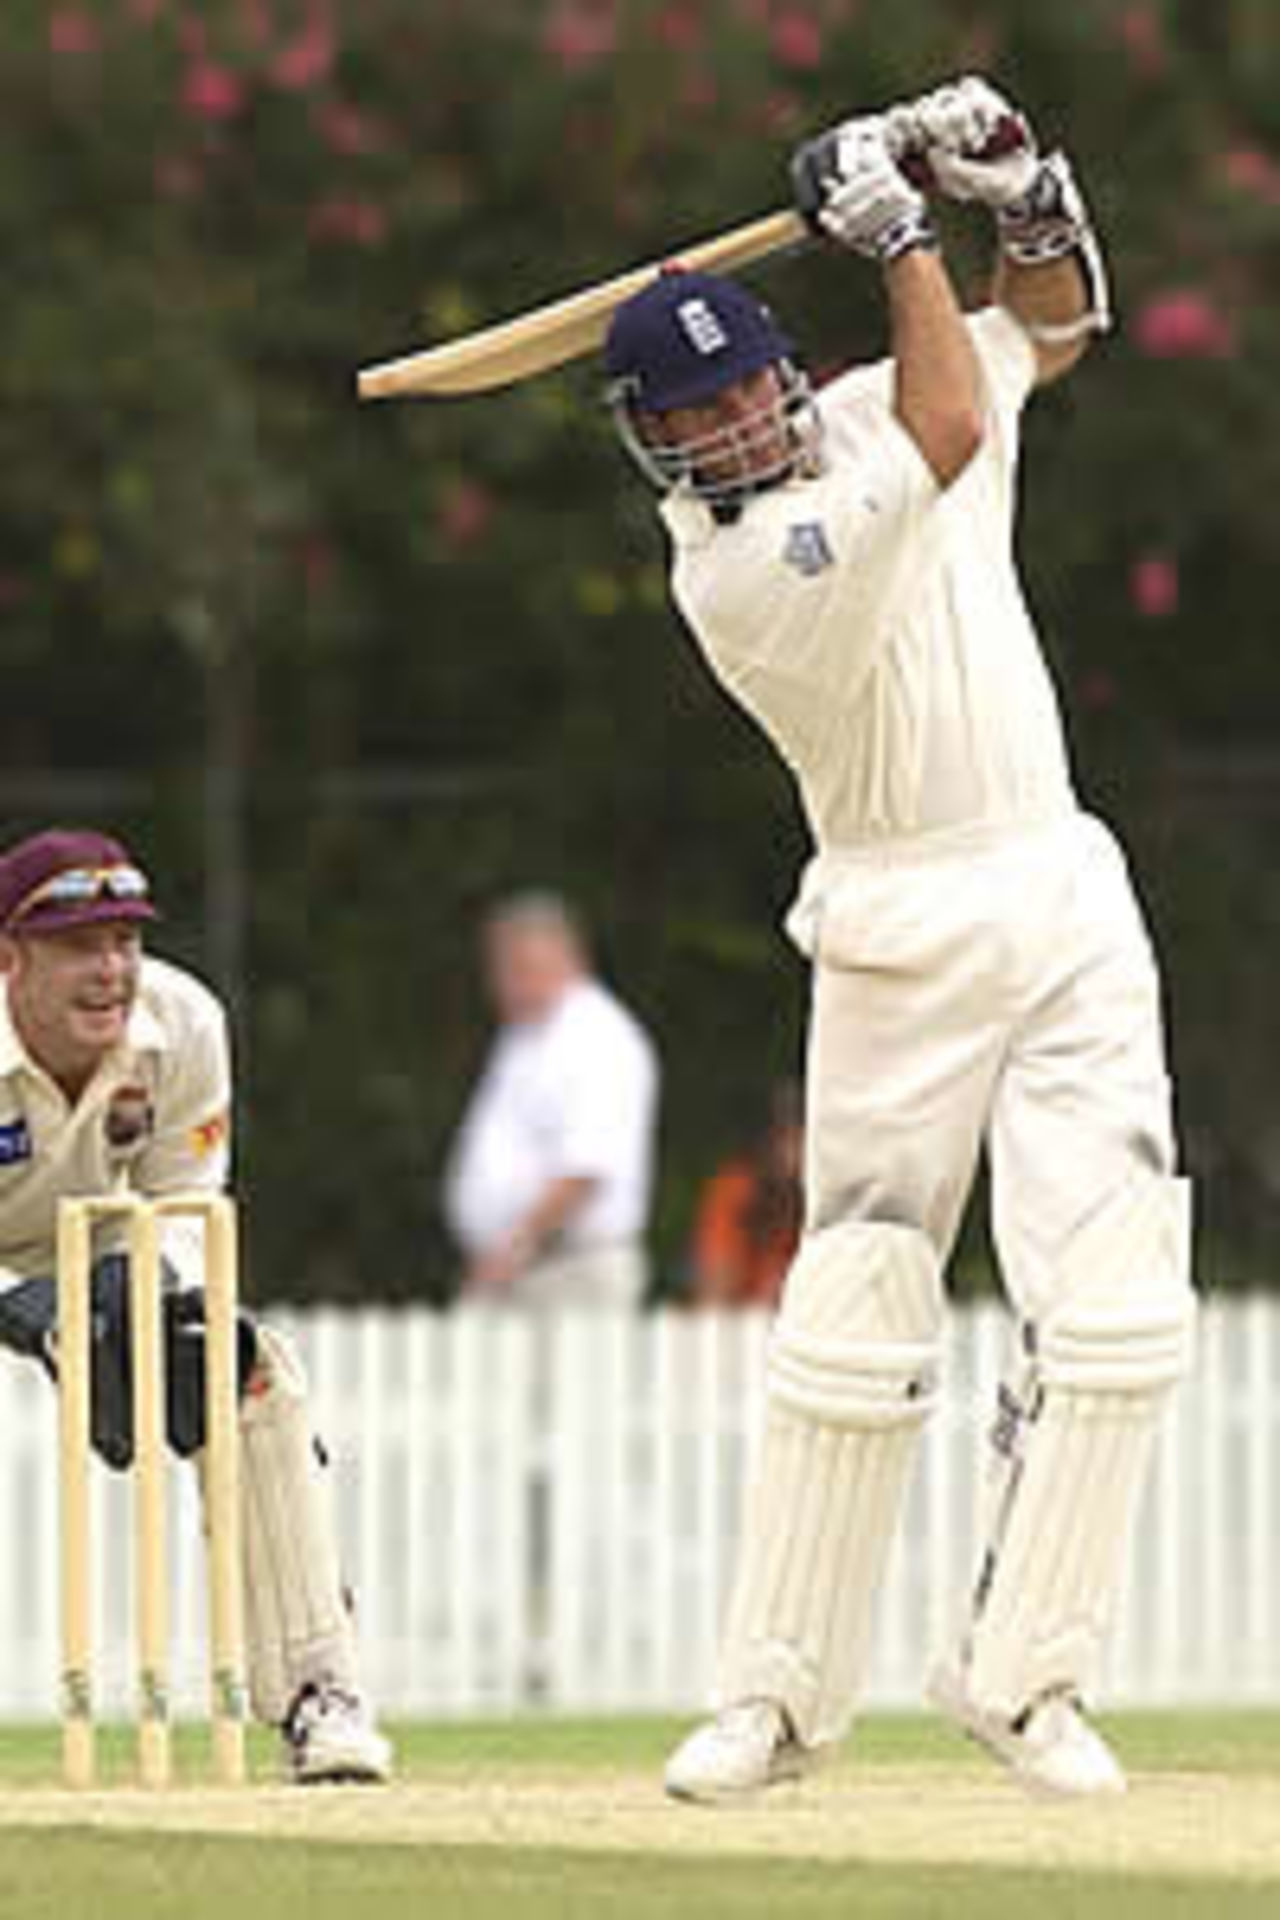 BRISBANE - NOVEMBER 4: Michael Vaughan of England hits out on his way to a century against Queensland during the three day tour match at the Allan Border Field cricket ground, Brisbane, Australia on November 4, 2002.